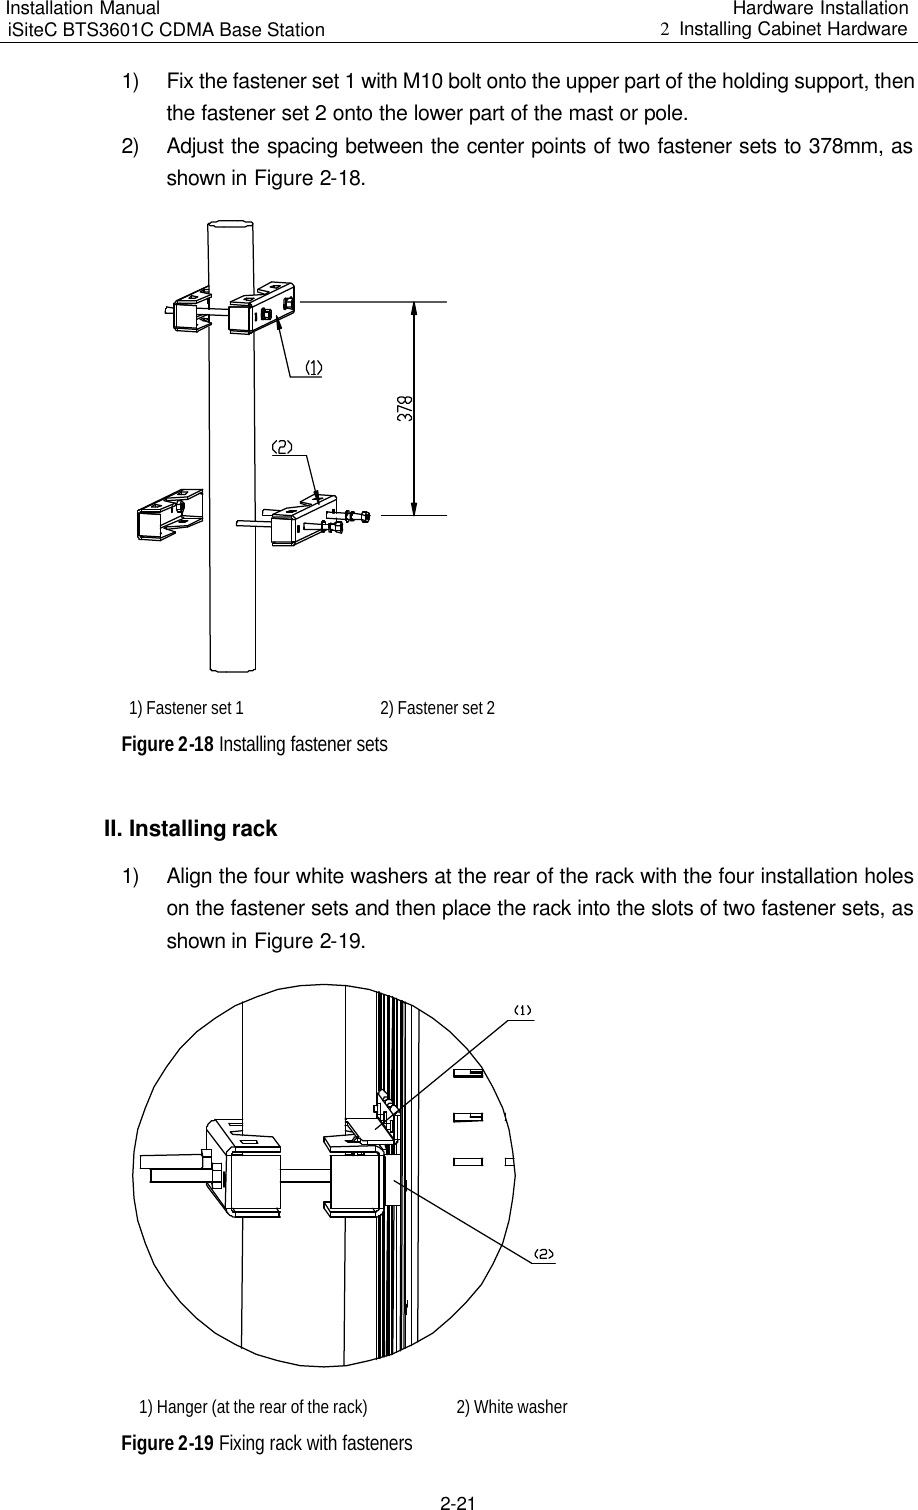 Installation Manual   iSiteC BTS3601C CDMA Base Station Hardware Installation 2  Installing Cabinet Hardware  2-21 1) Fix the fastener set 1 with M10 bolt onto the upper part of the holding support, then the fastener set 2 onto the lower part of the mast or pole. 2) Adjust the spacing between the center points of two fastener sets to 378mm, as shown in Figure 2-18.   1) Fastener set 1   2) Fastener set 2 Figure 2-18 Installing fastener sets II. Installing rack 1) Align the four white washers at the rear of the rack with the four installation holes on the fastener sets and then place the rack into the slots of two fastener sets, as shown in Figure 2-19.   1) Hanger (at the rear of the rack)  2) White washer Figure 2-19 Fixing rack with fasteners 